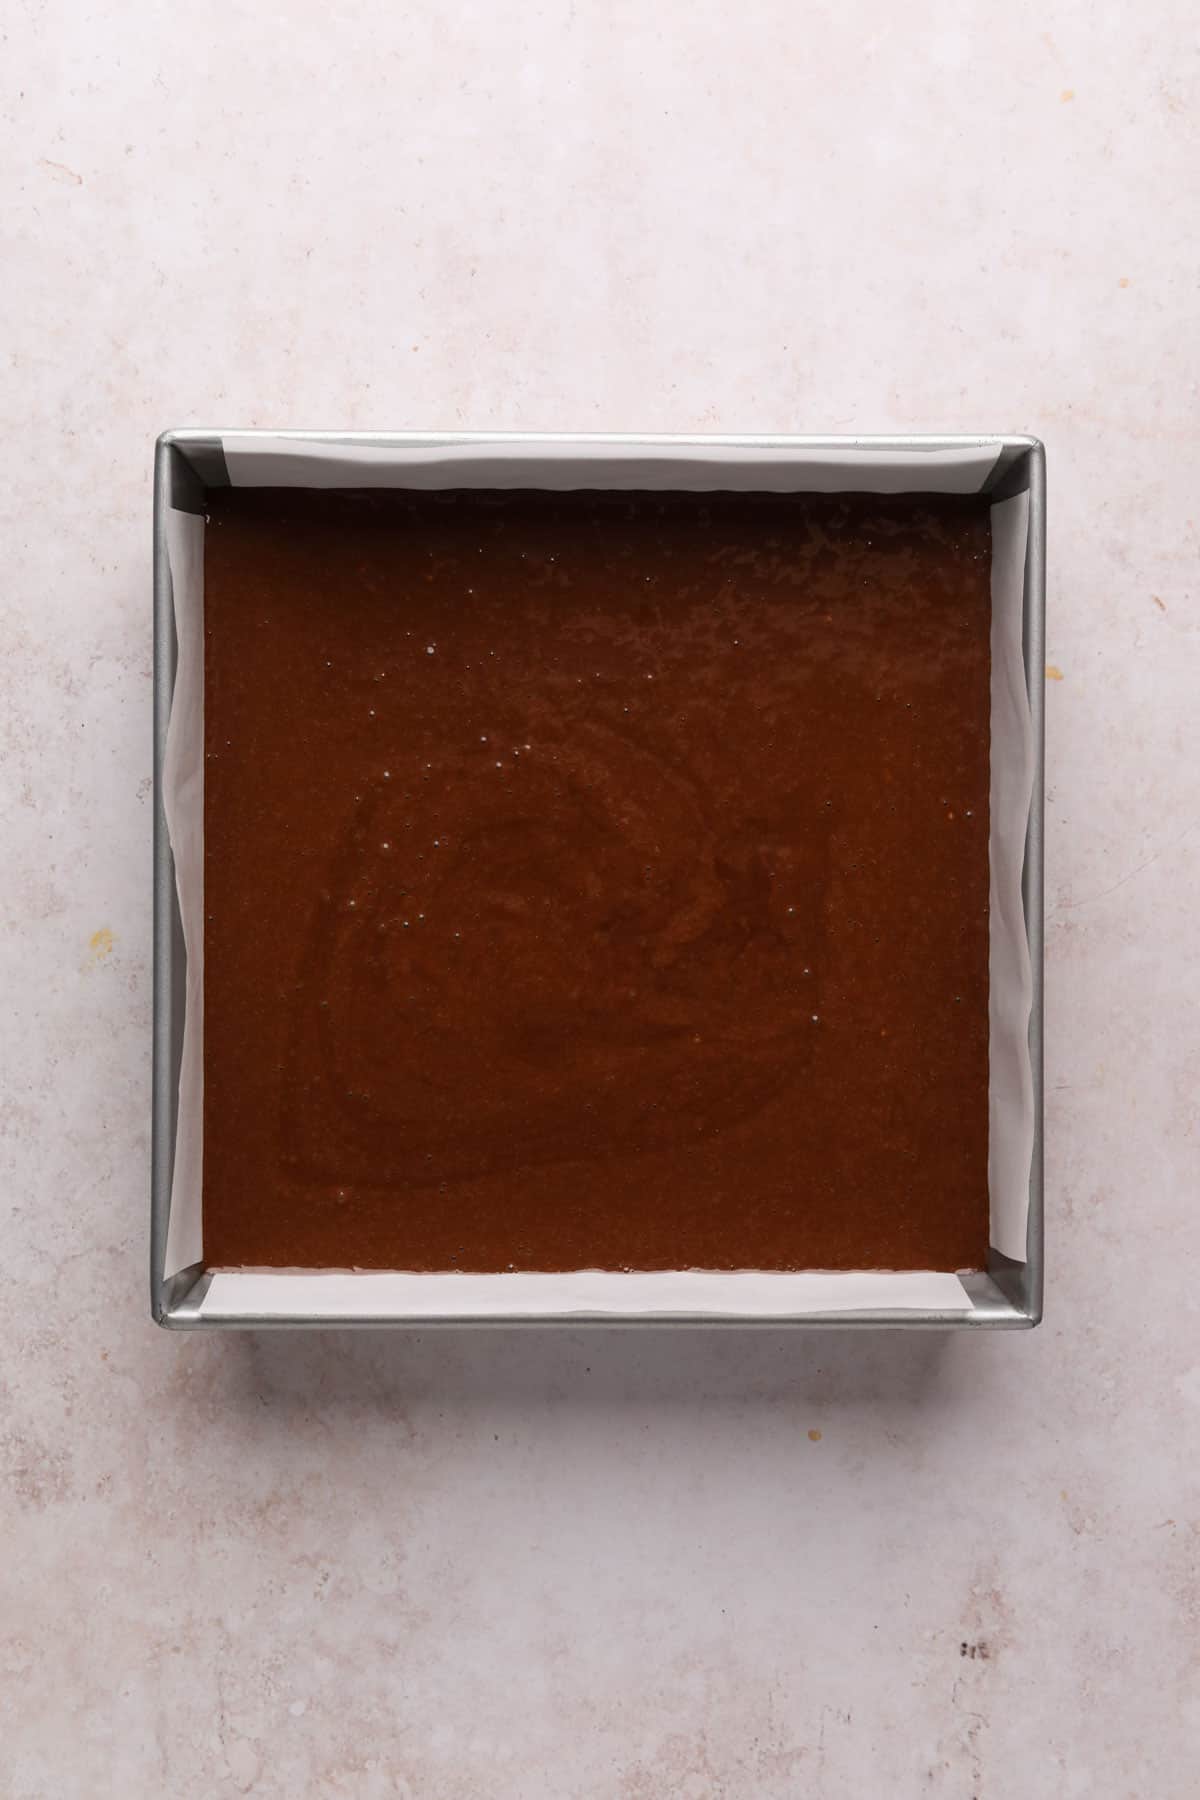 Chocolate fudge cake batter in a 9x9 square baking pan lined with parchment paper.